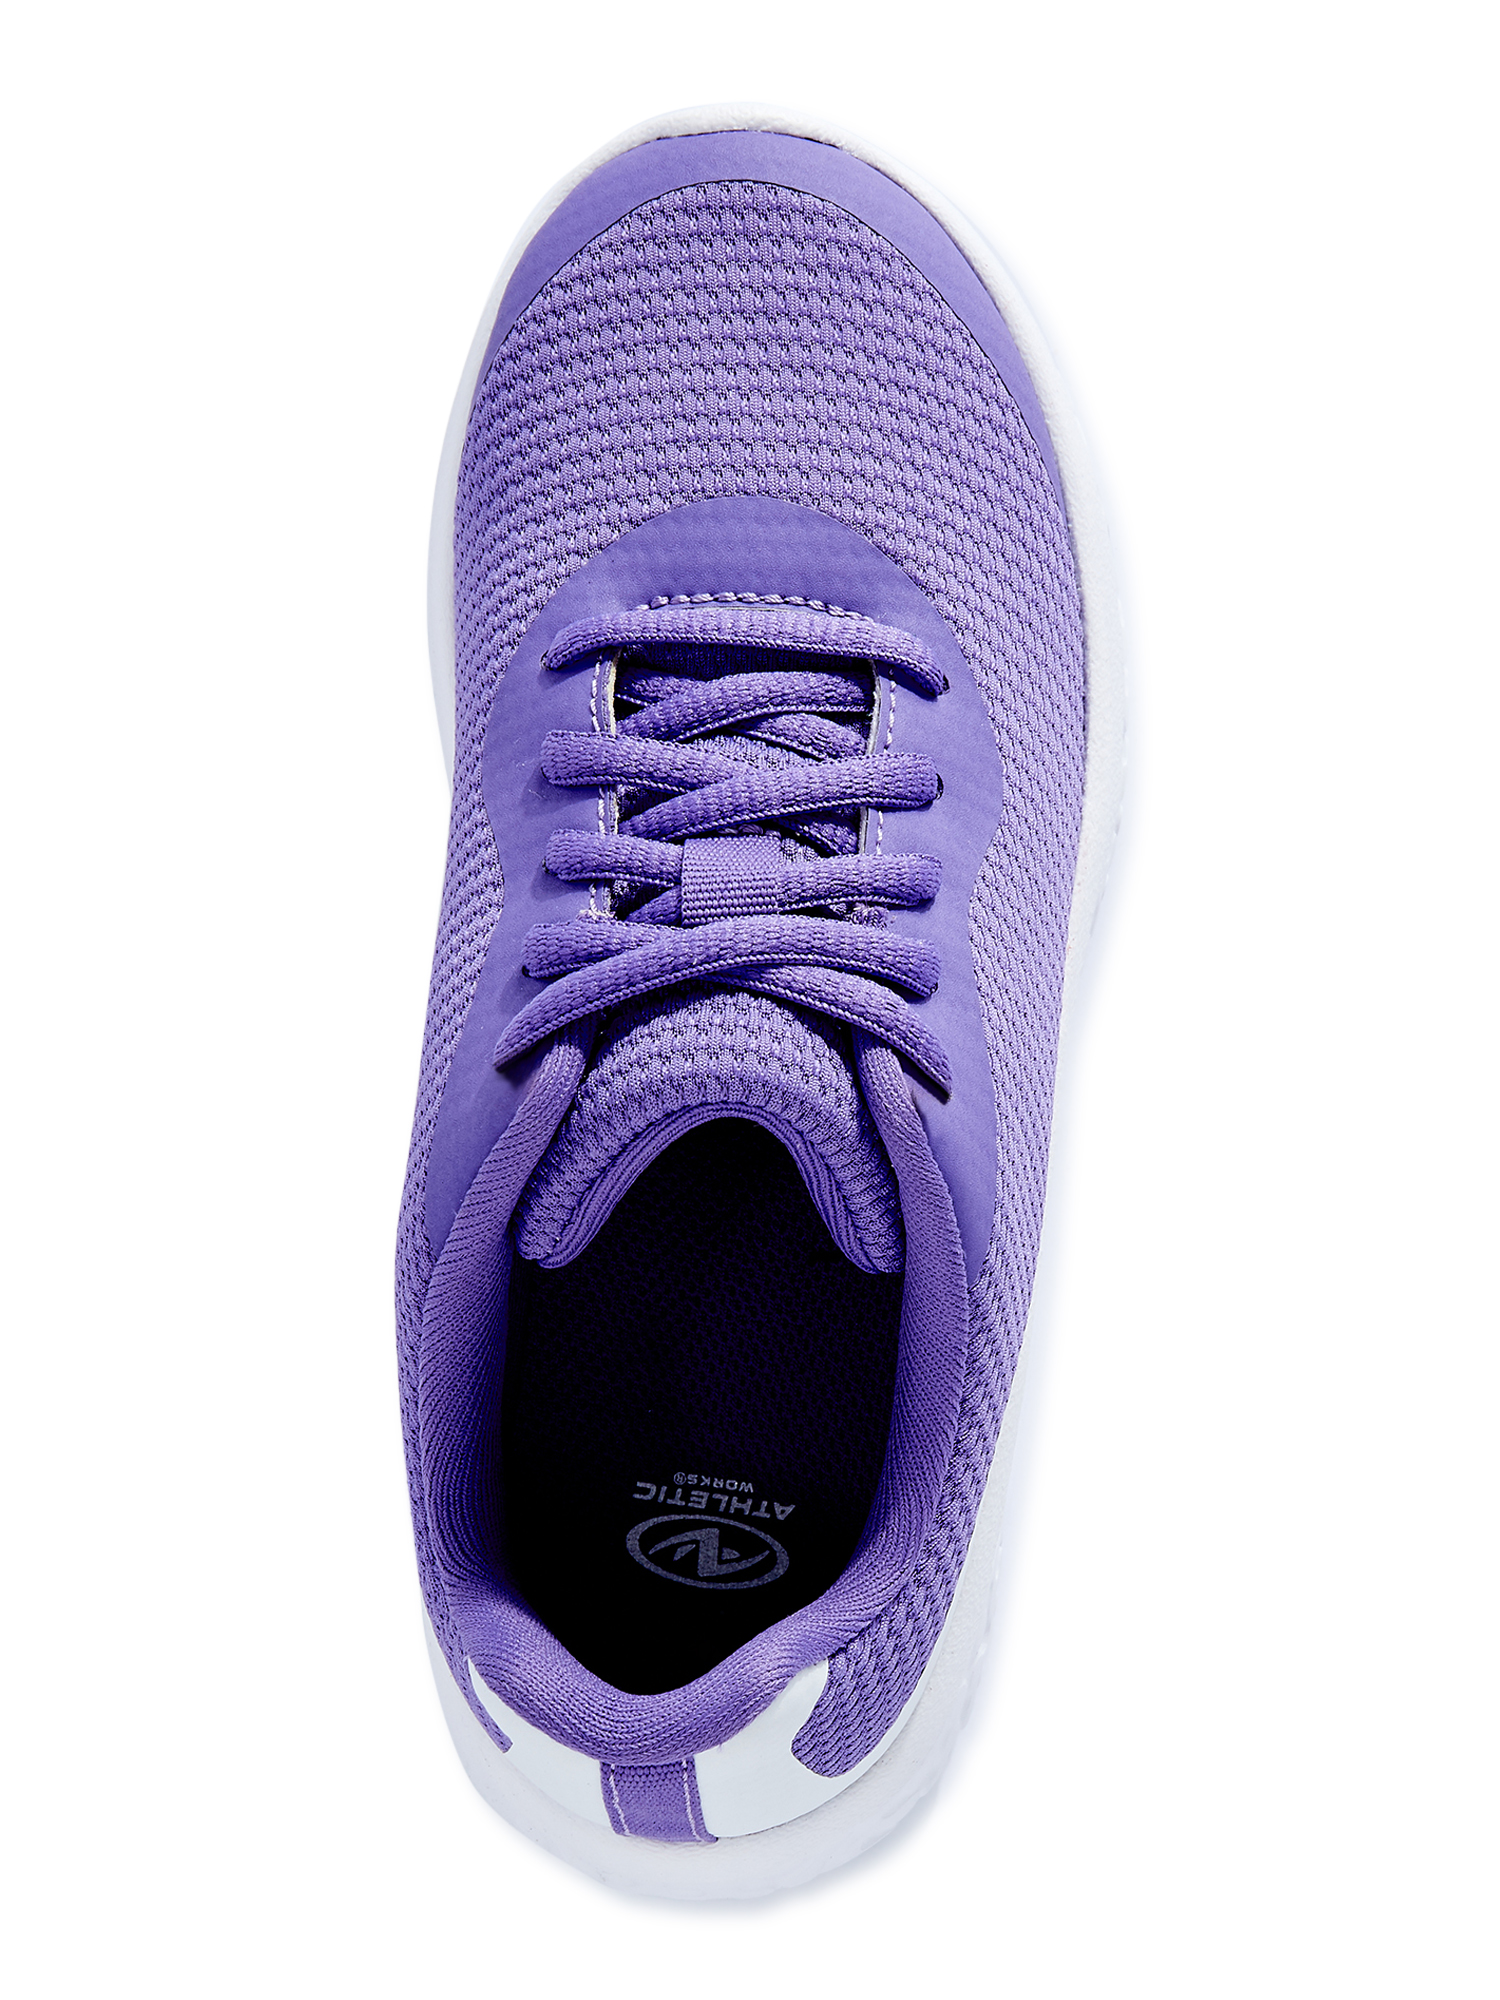 Athletic Works Core Lightweight Athletic Sneaker (Little Girls & Big Girls) - image 2 of 6